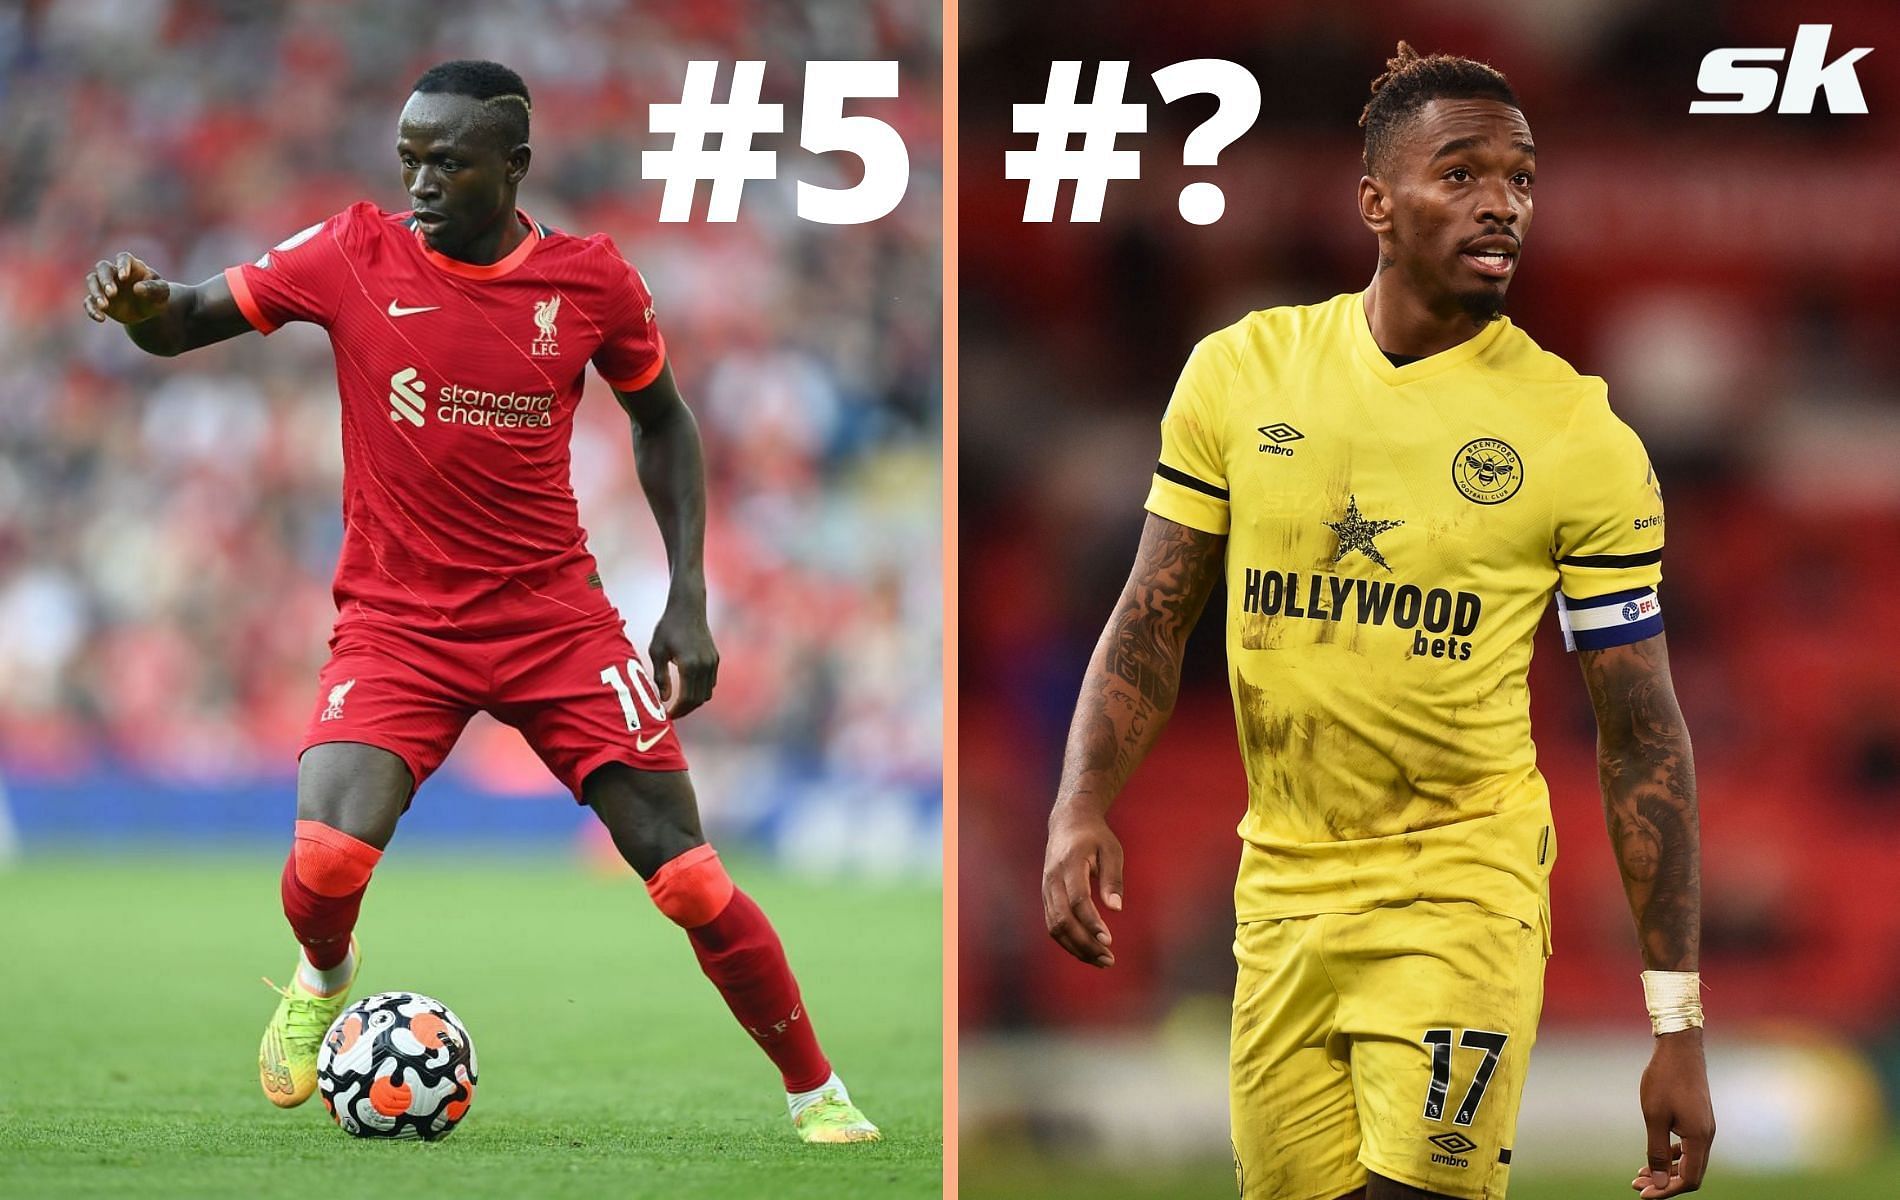 Ranking the 5 best forwards in Premier League right now based on ratings